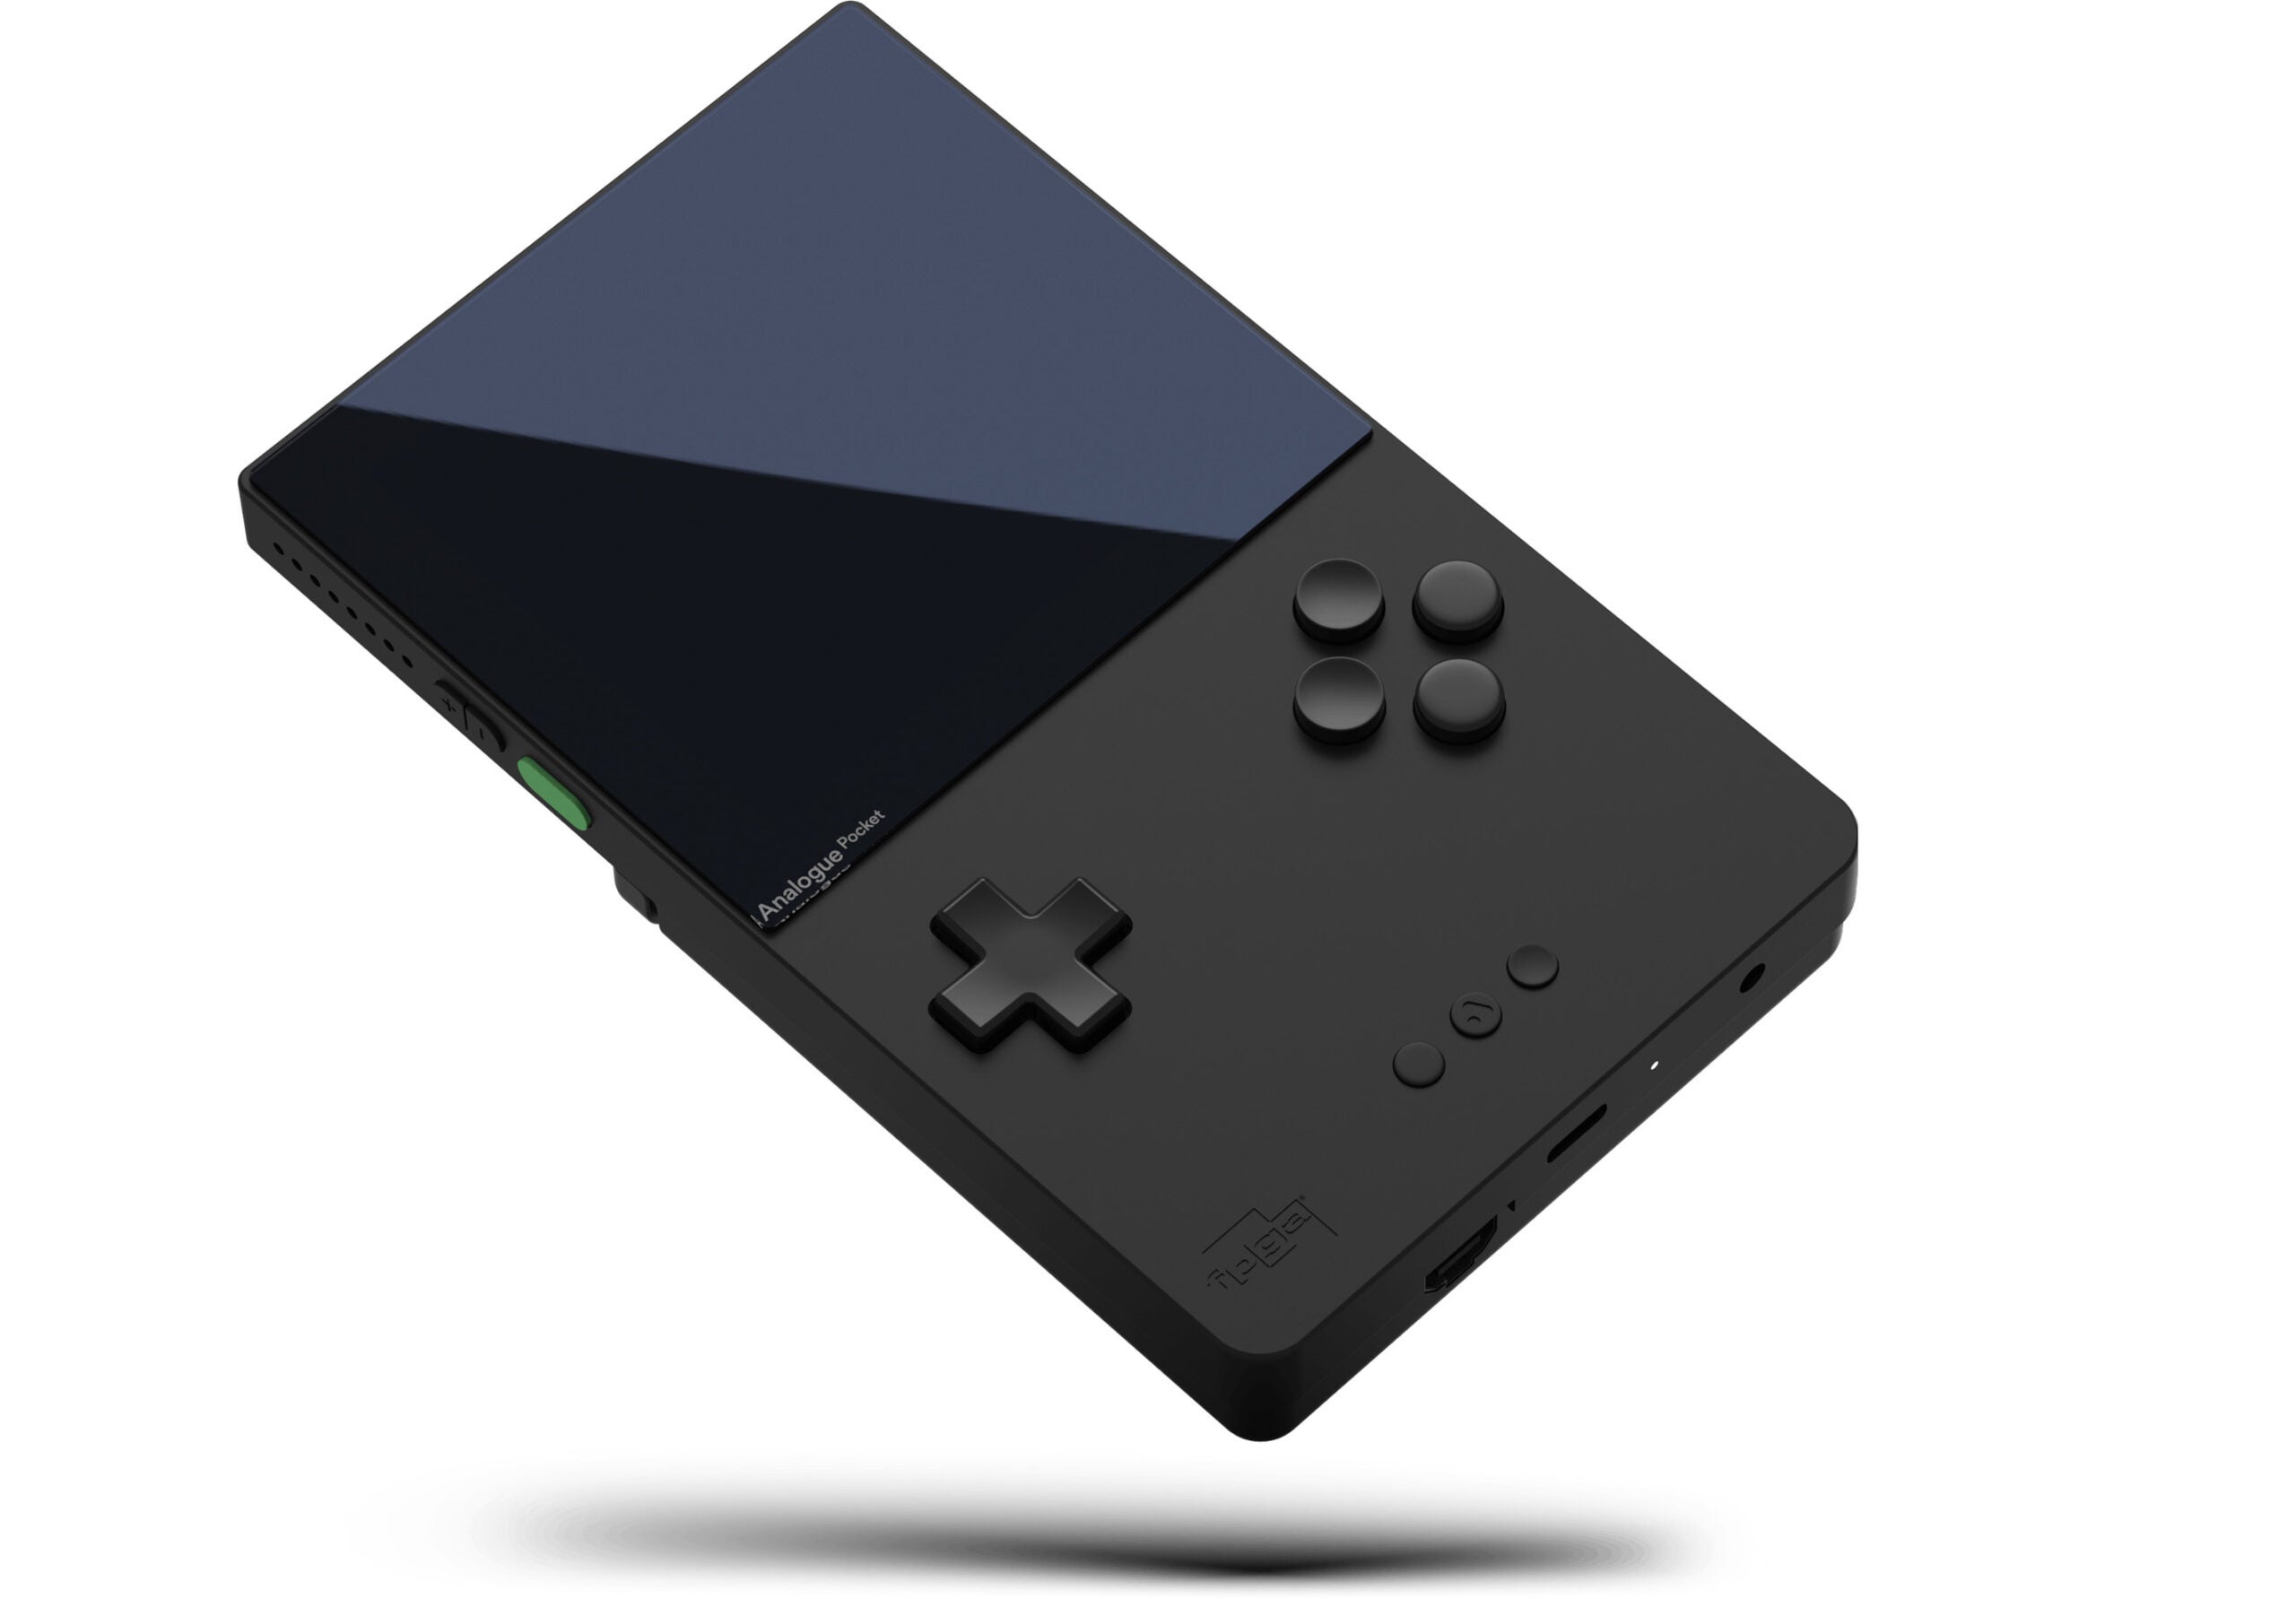 The new Analogue Pocket will soon be available to save Game Boy Camera files onto a MicroSD card.